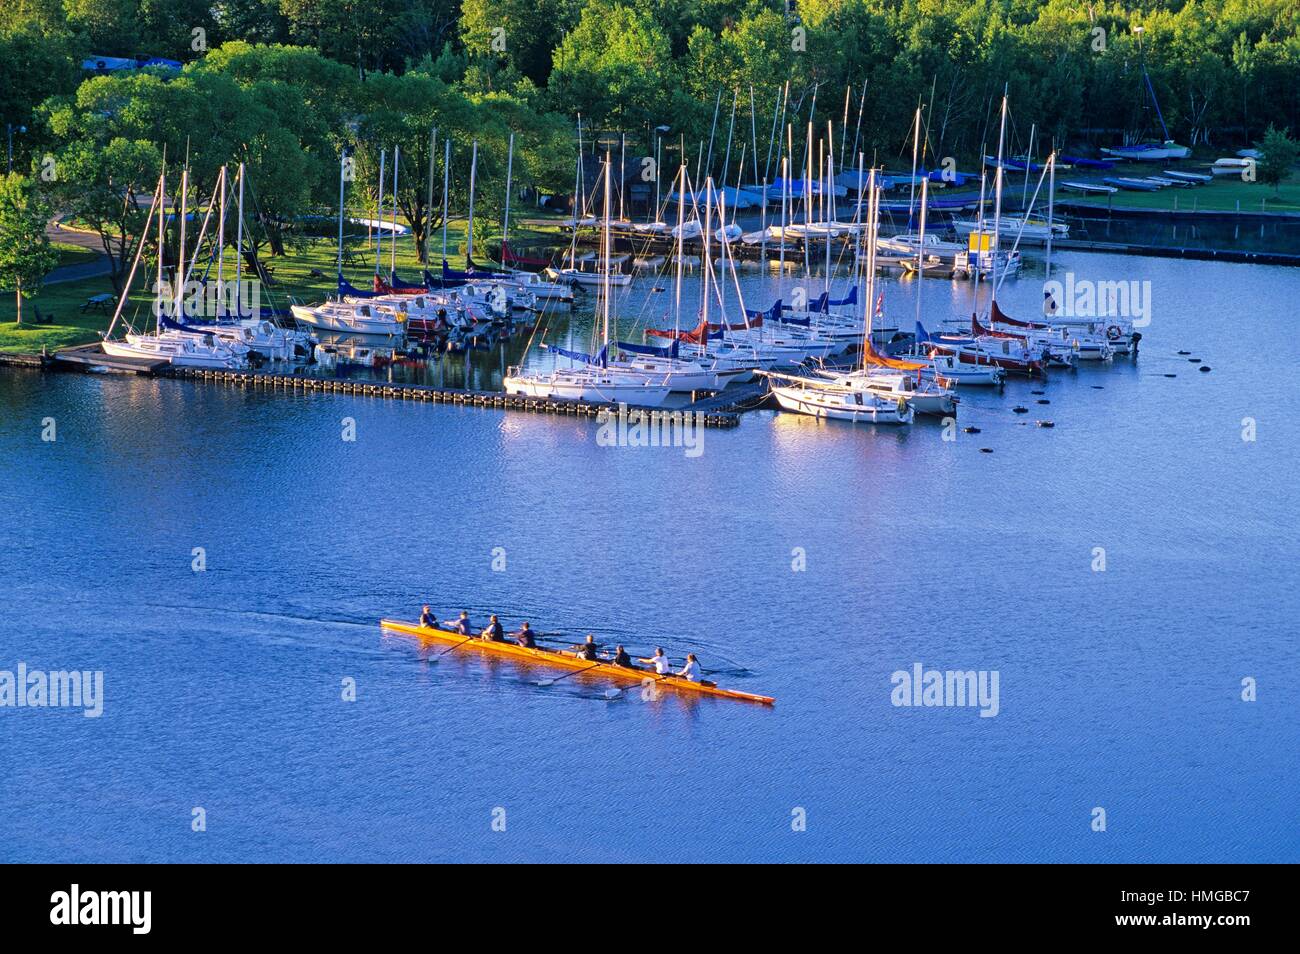 Team of rowers practising sculling near yacht club in Ramsay lake, Greater Sudbury, Ontario, Canada. Stock Photo